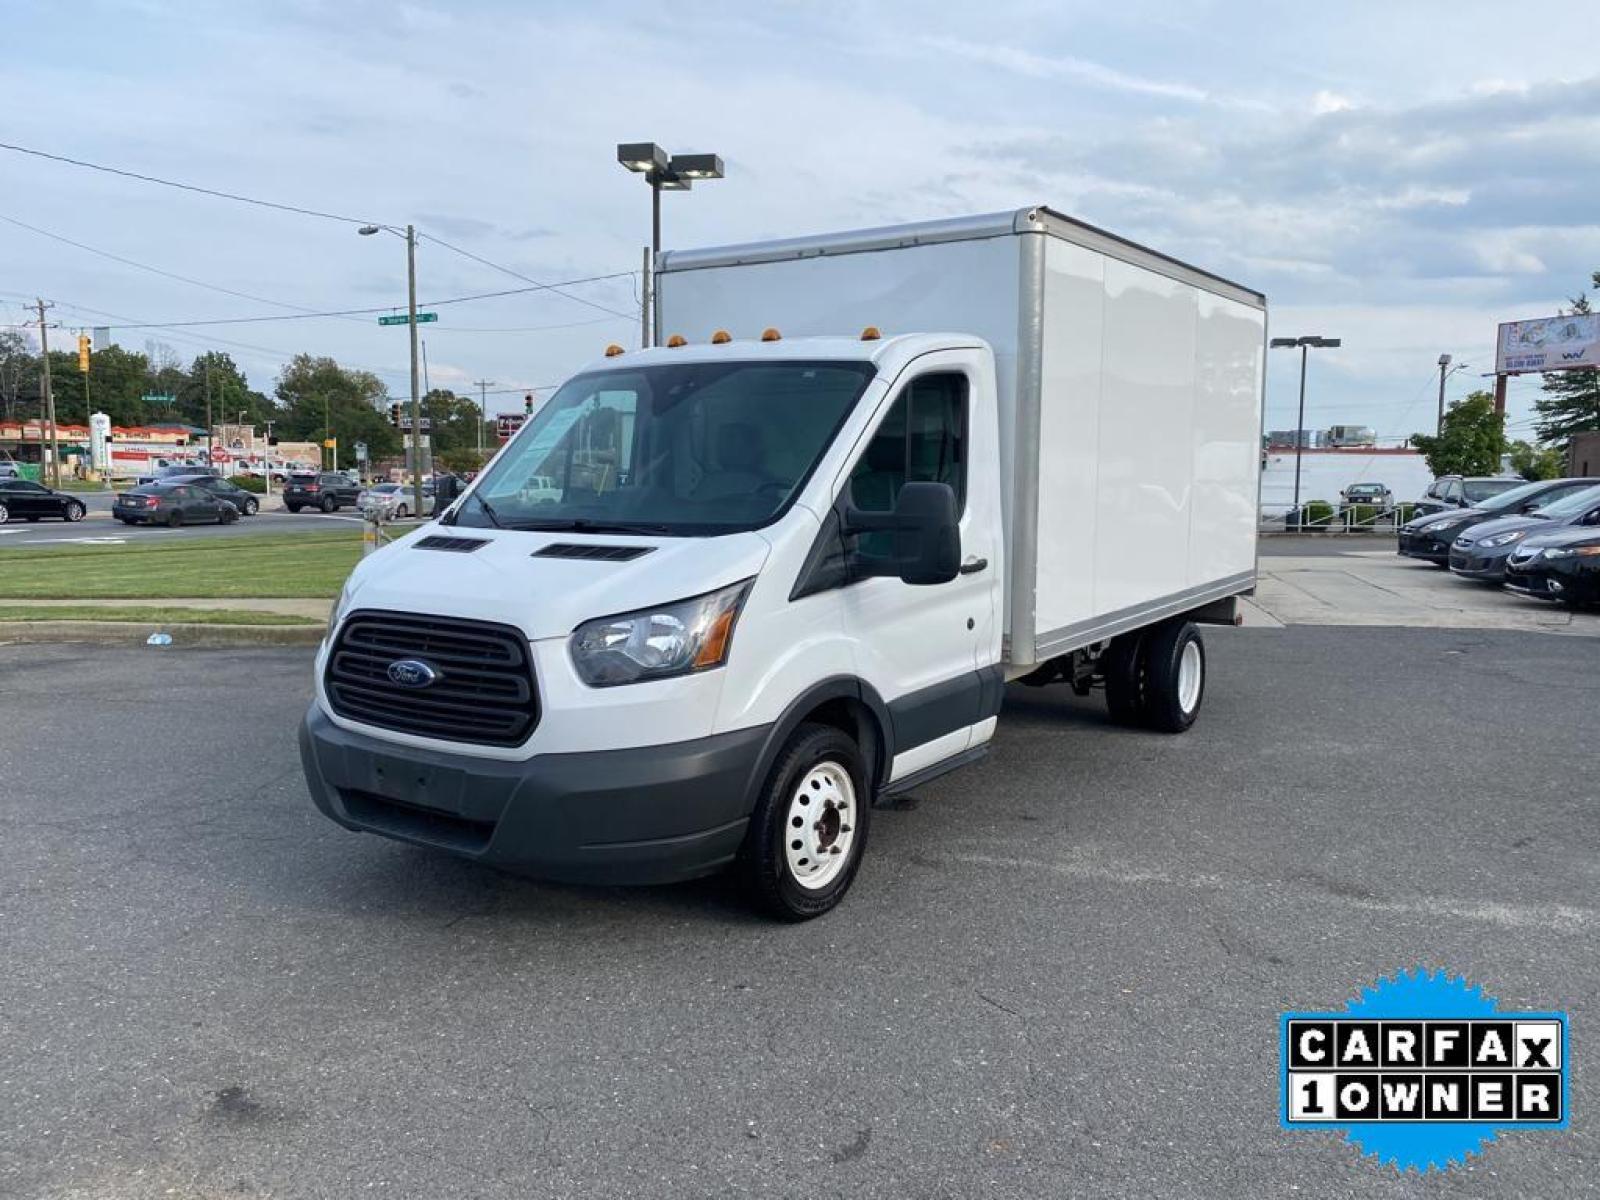 2018 Oxford White /Pewter Ford Transit Chassis Cab Base (1FDBF8ZM1JK) with an V6, 3.7L engine, 6-speed automatic transmission, located at 3147 E Independence Blvd, Charlotte, NC, 28205, 35.200268, -80.773651 - <b>Equipment</b><br>This model features a hands-free Bluetooth phone system. See what's behind you with the back up camera on this vehicle. This vehicle is a certified CARFAX 1-owner. It is rear wheel drive. This vehicle has a V6, 3.7L high output engine. This 1 ton van embodies class and sophistica - Photo #8